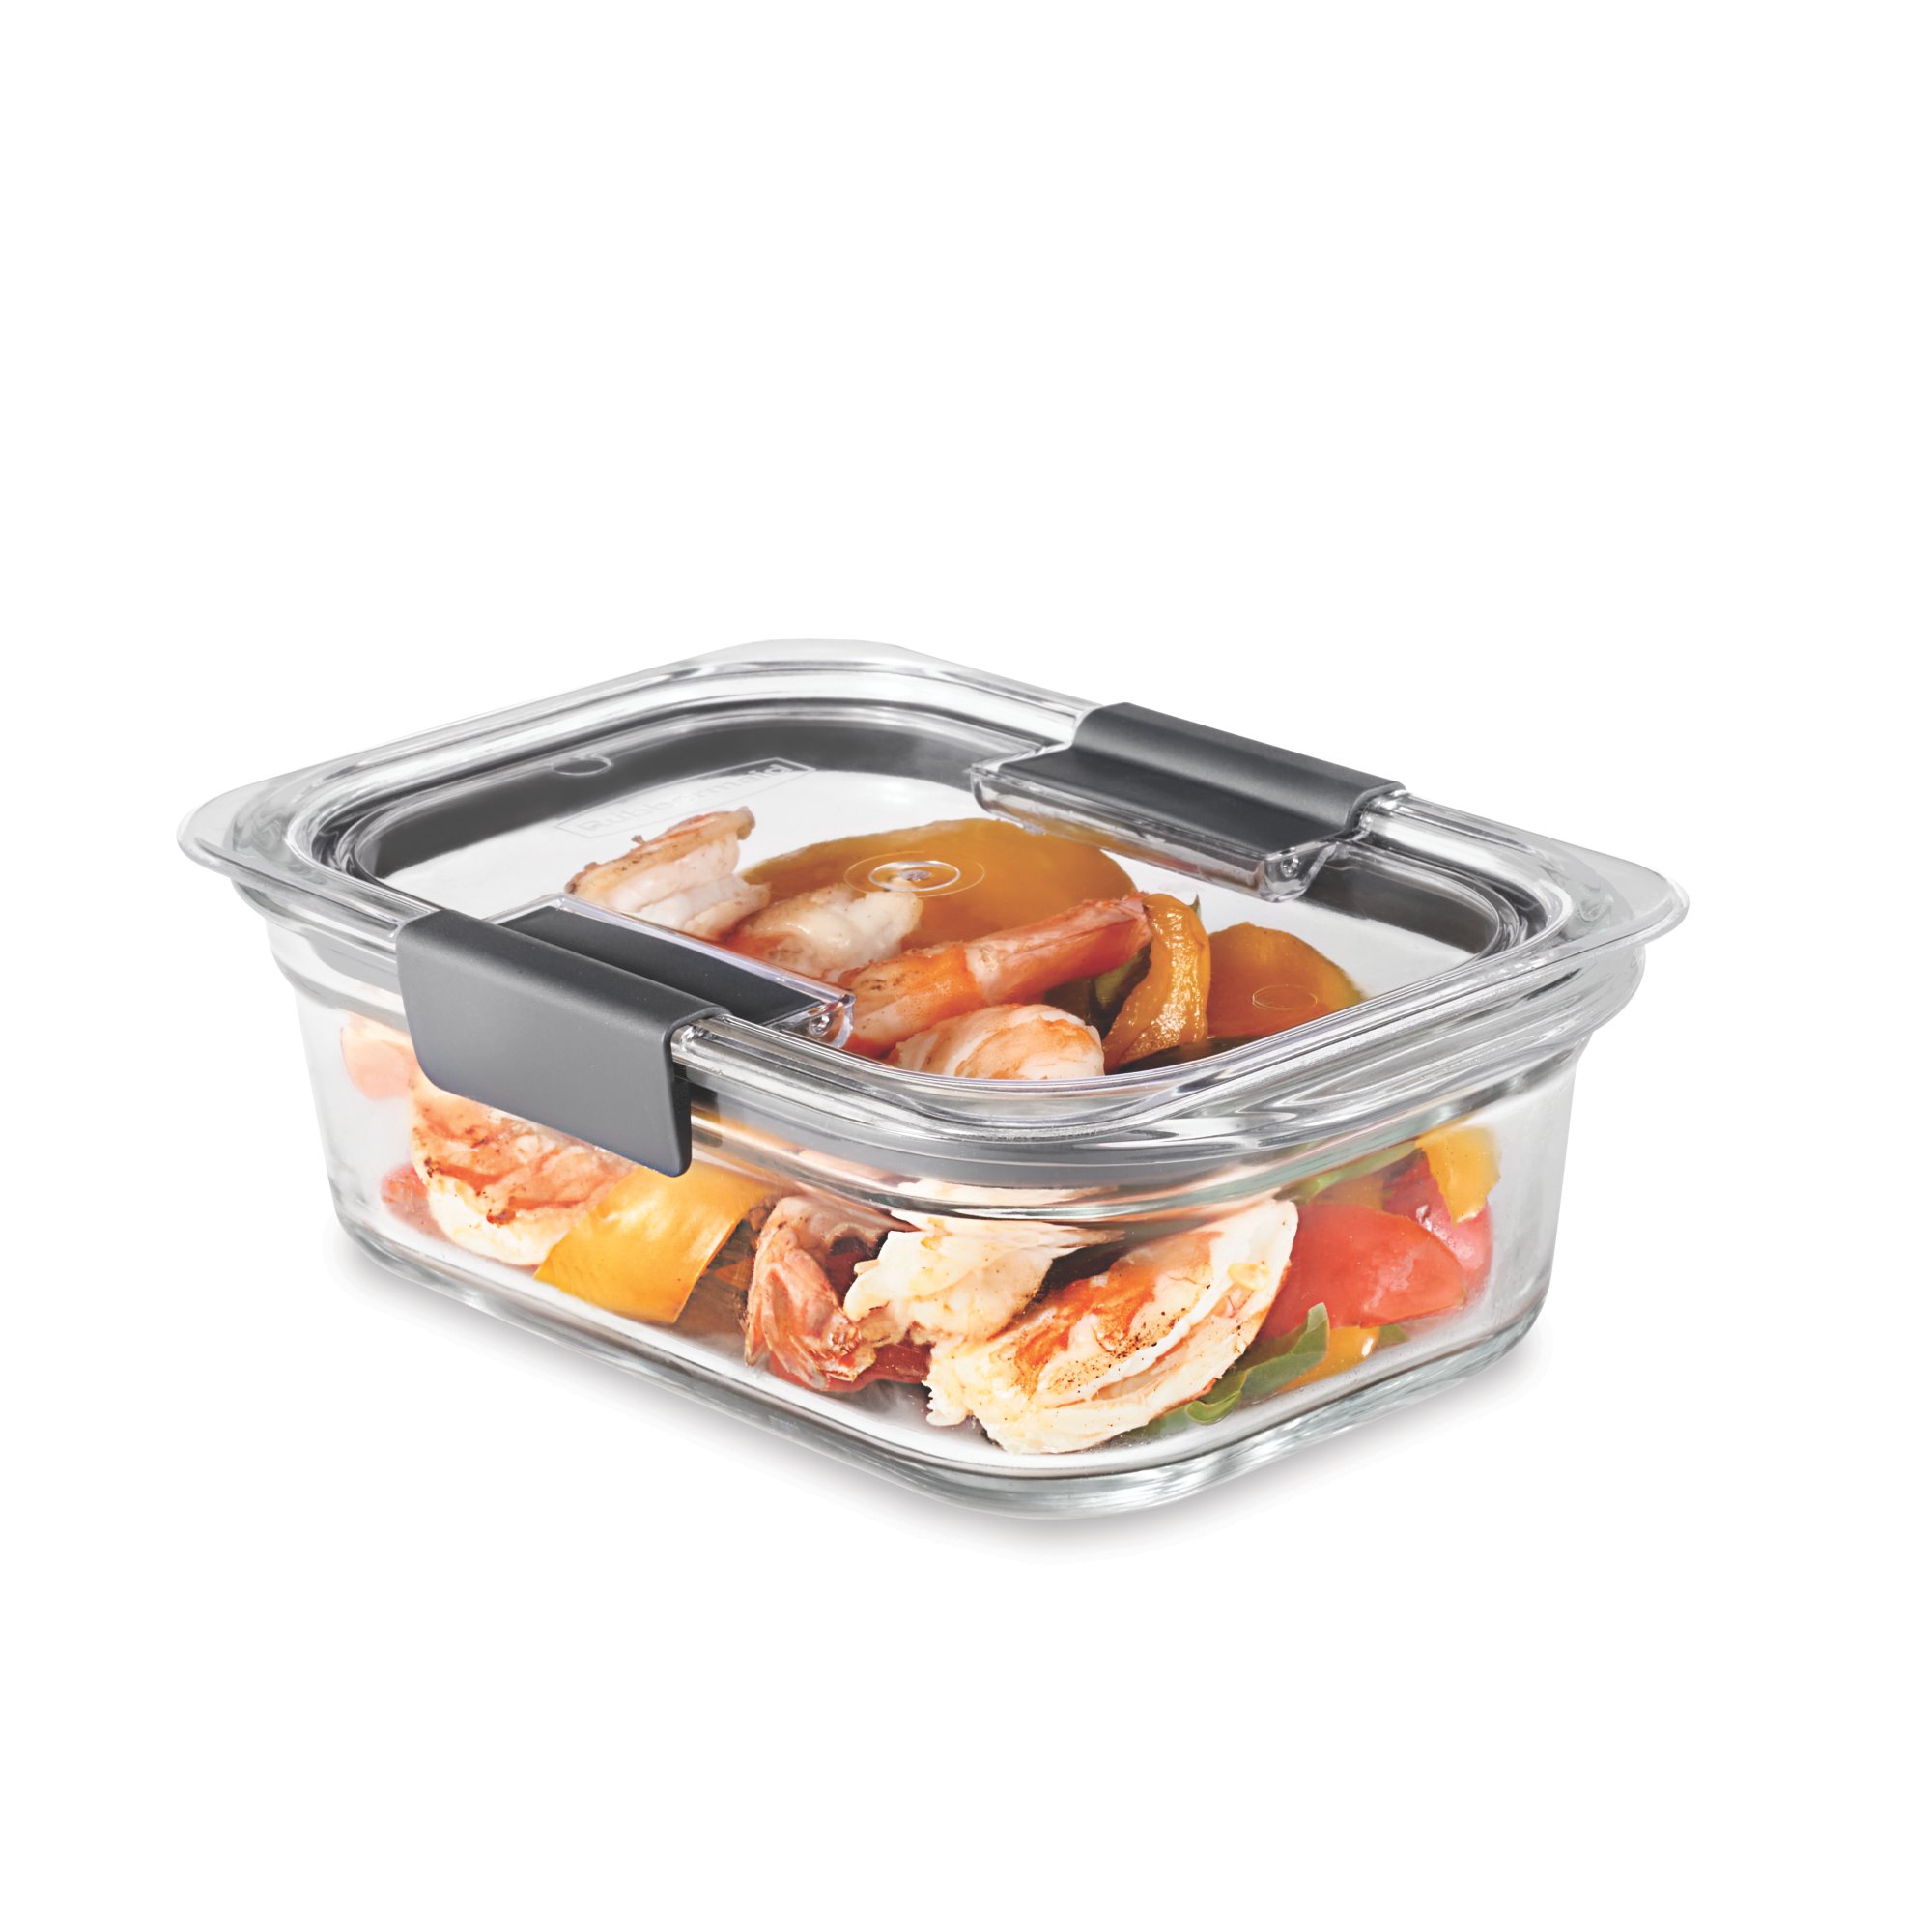 https://s7d9.scene7.com/is/image/NewellRubbermaid/2118320-rubbermaid-food-storage-brilliance-glass-clear-3.2c-with-food-angle?wid=2000&hei=2000